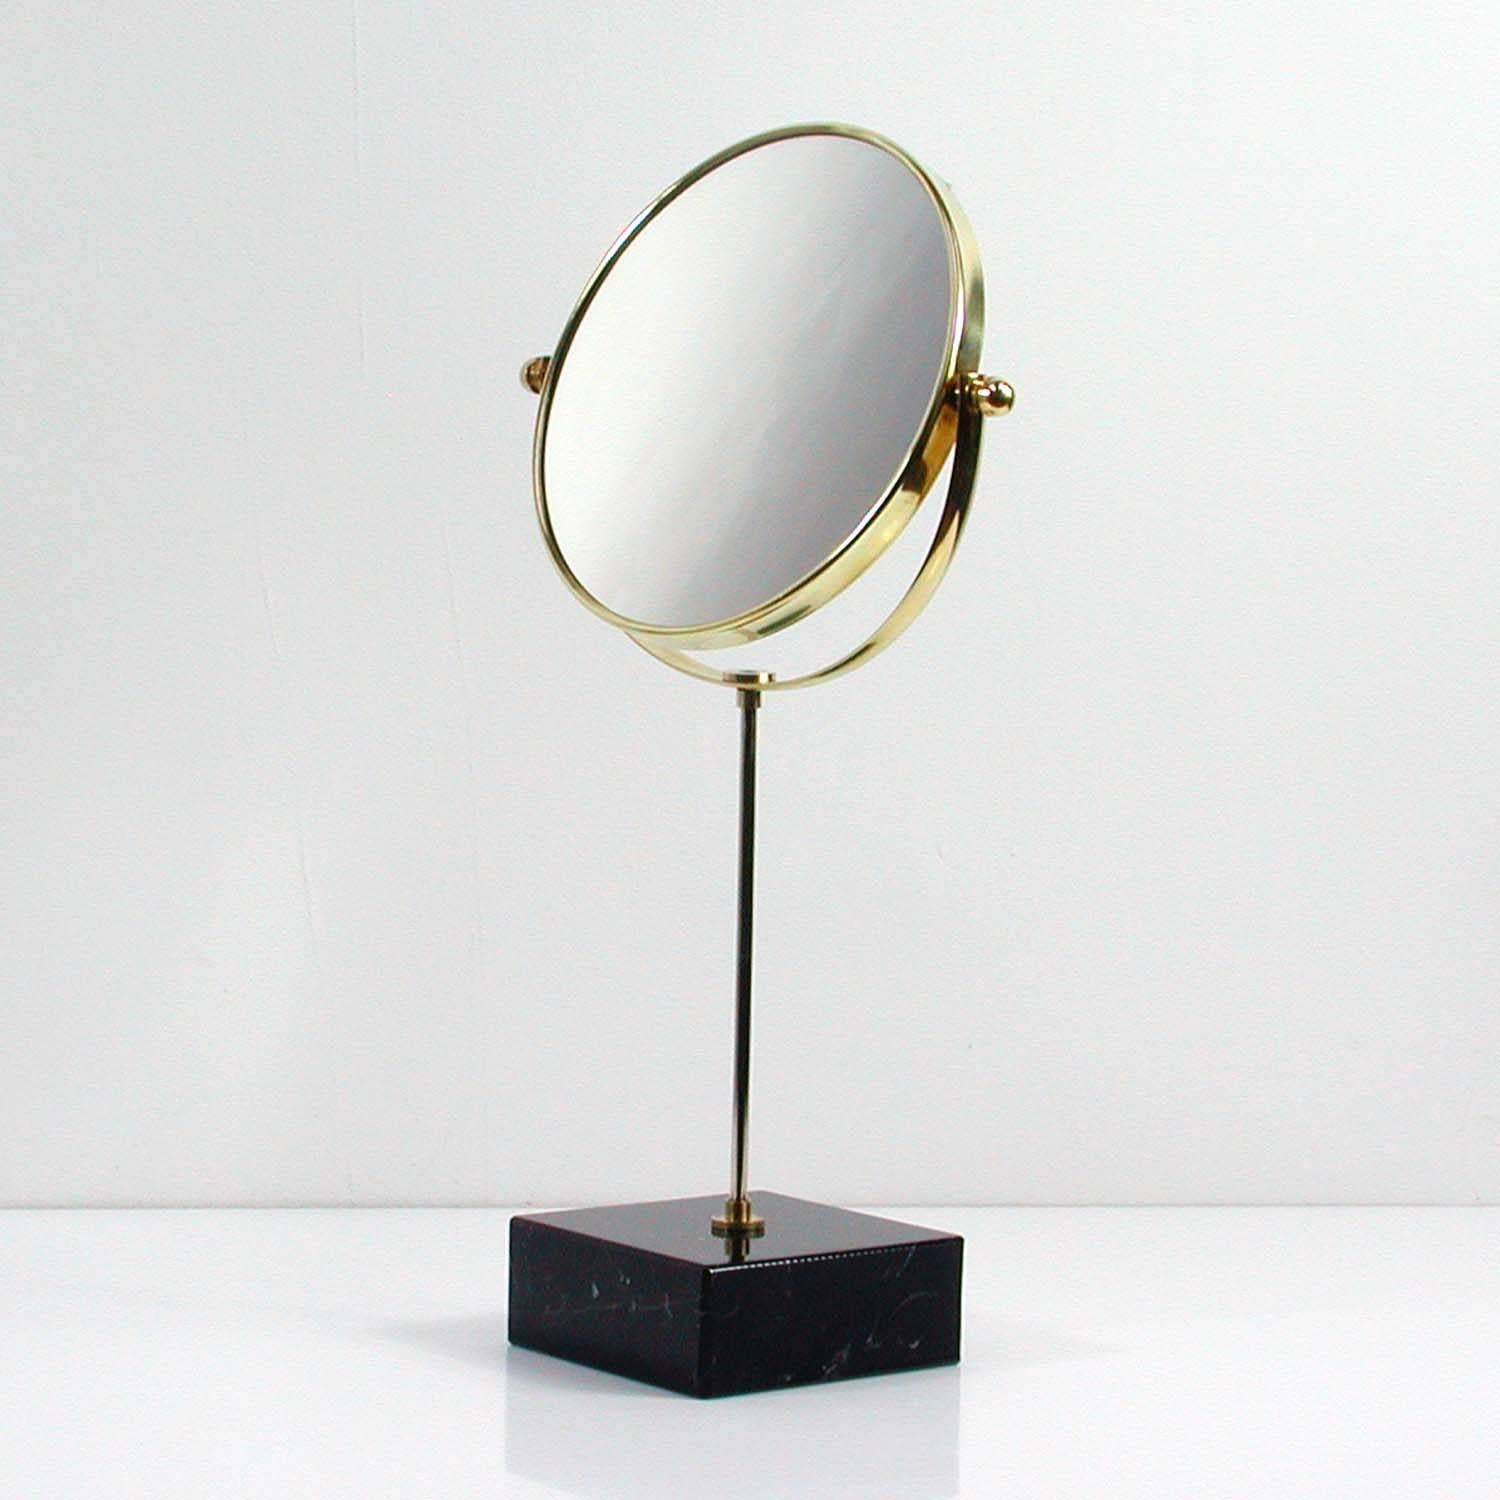 This elegant vanity mirror was manufactured in Italy in the 1950s.

The mirror has got an adjustable mirror top and a marble base. One side of the mirror has got normal mirror glass. The other side has got a magnifying mirror.